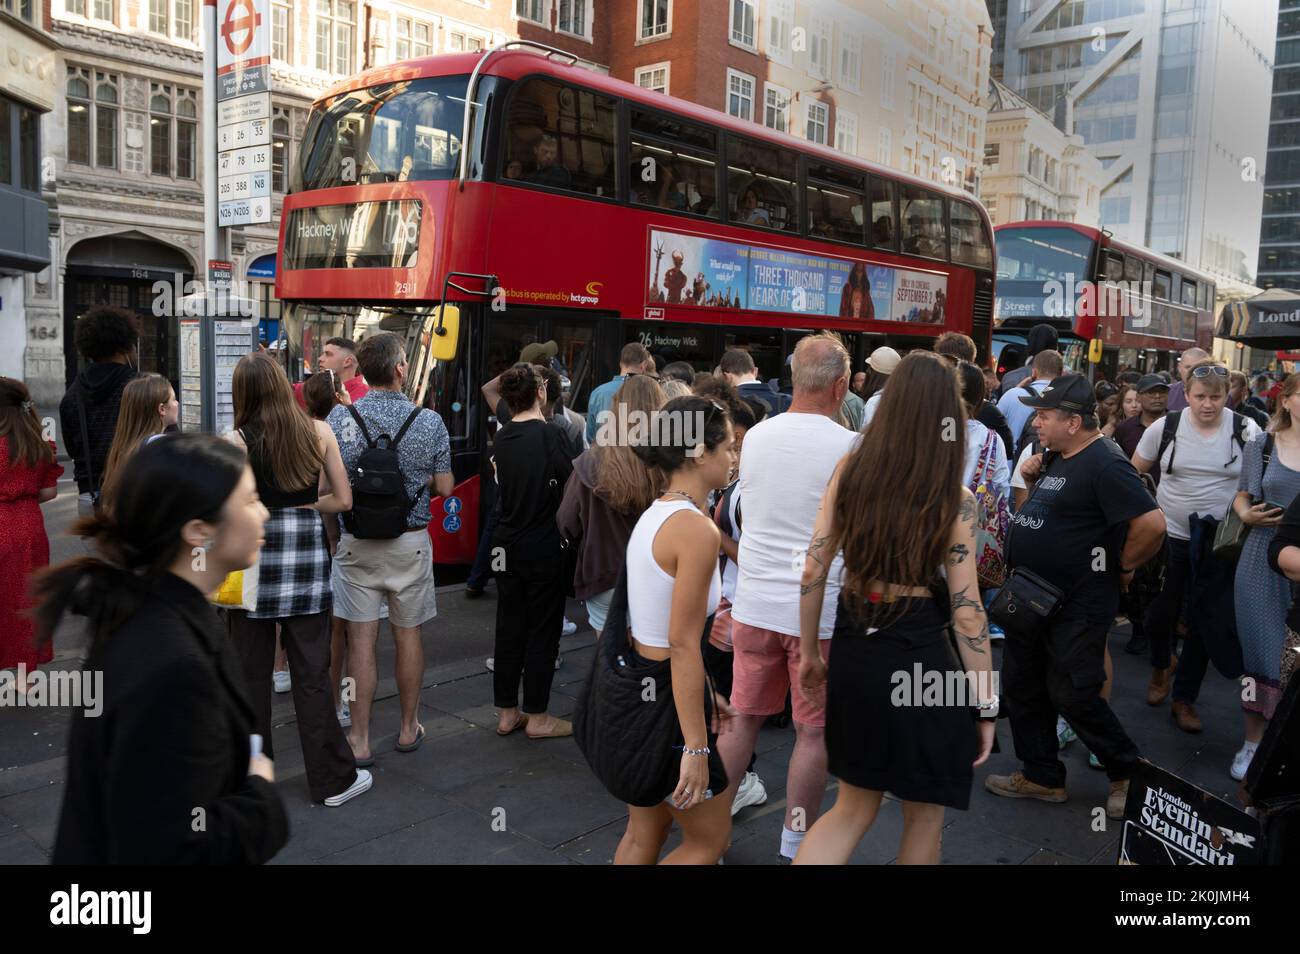 London, England. Liverpool Street station during a strike on the underground and railway. Passengers wait at a bus stop. Stock Photo